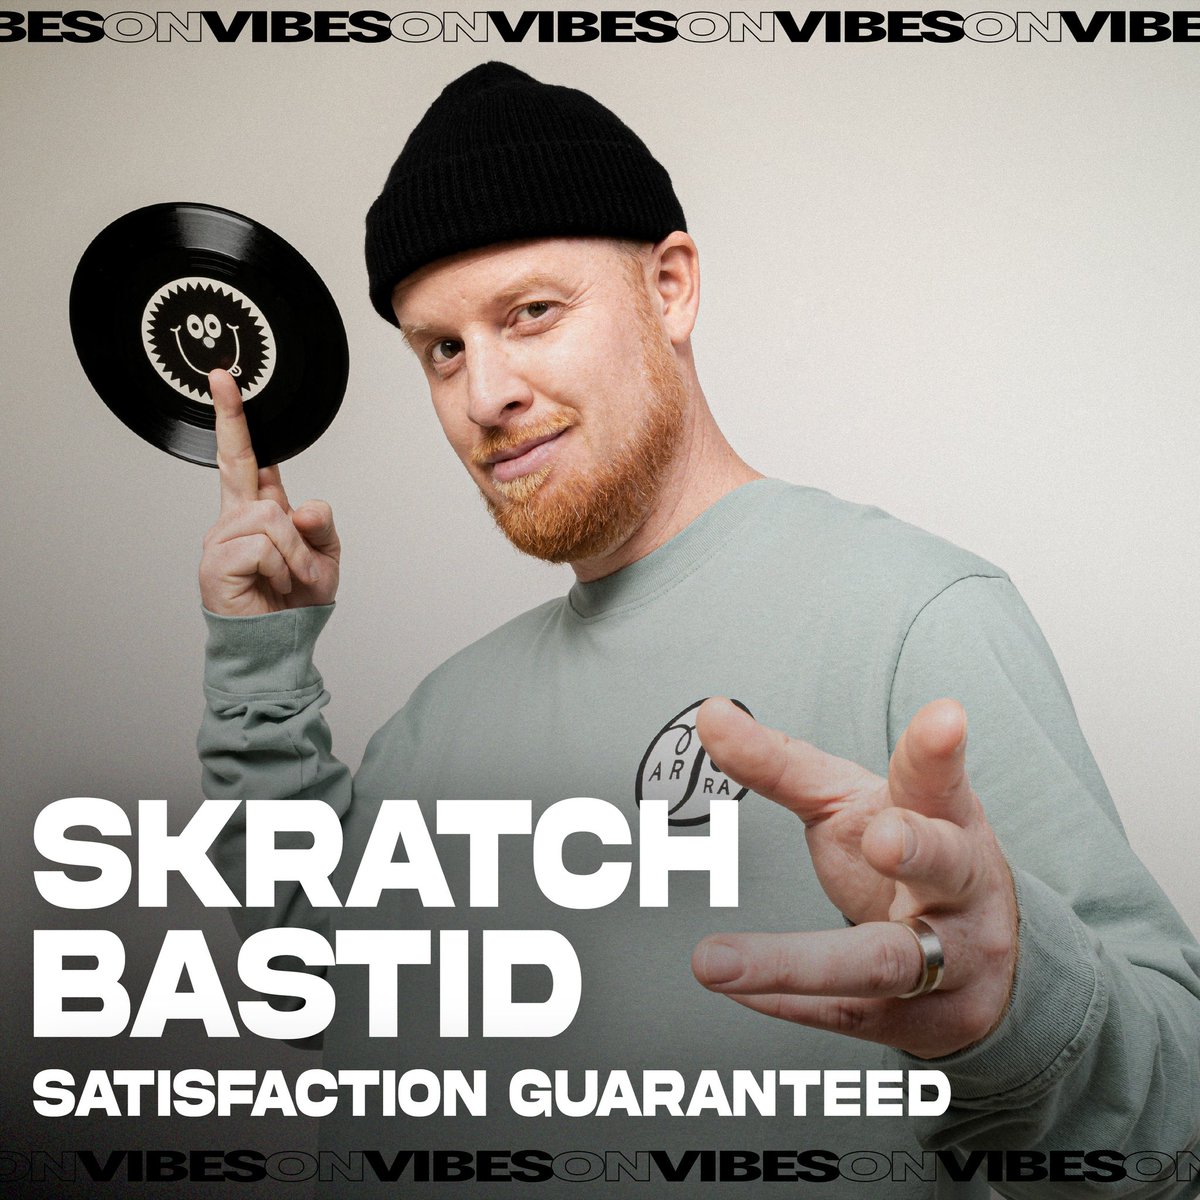 Great news! I’m partnering with @AppleMusic to bring my mixes to their platform. Very exciting to be at your fingertips on such a big platform. First one up is my “Satisfaction Guaranteed” mix, one. Hip-hop, funk, disco, reggae, and more, all cut-up and sequenced in mixtape style